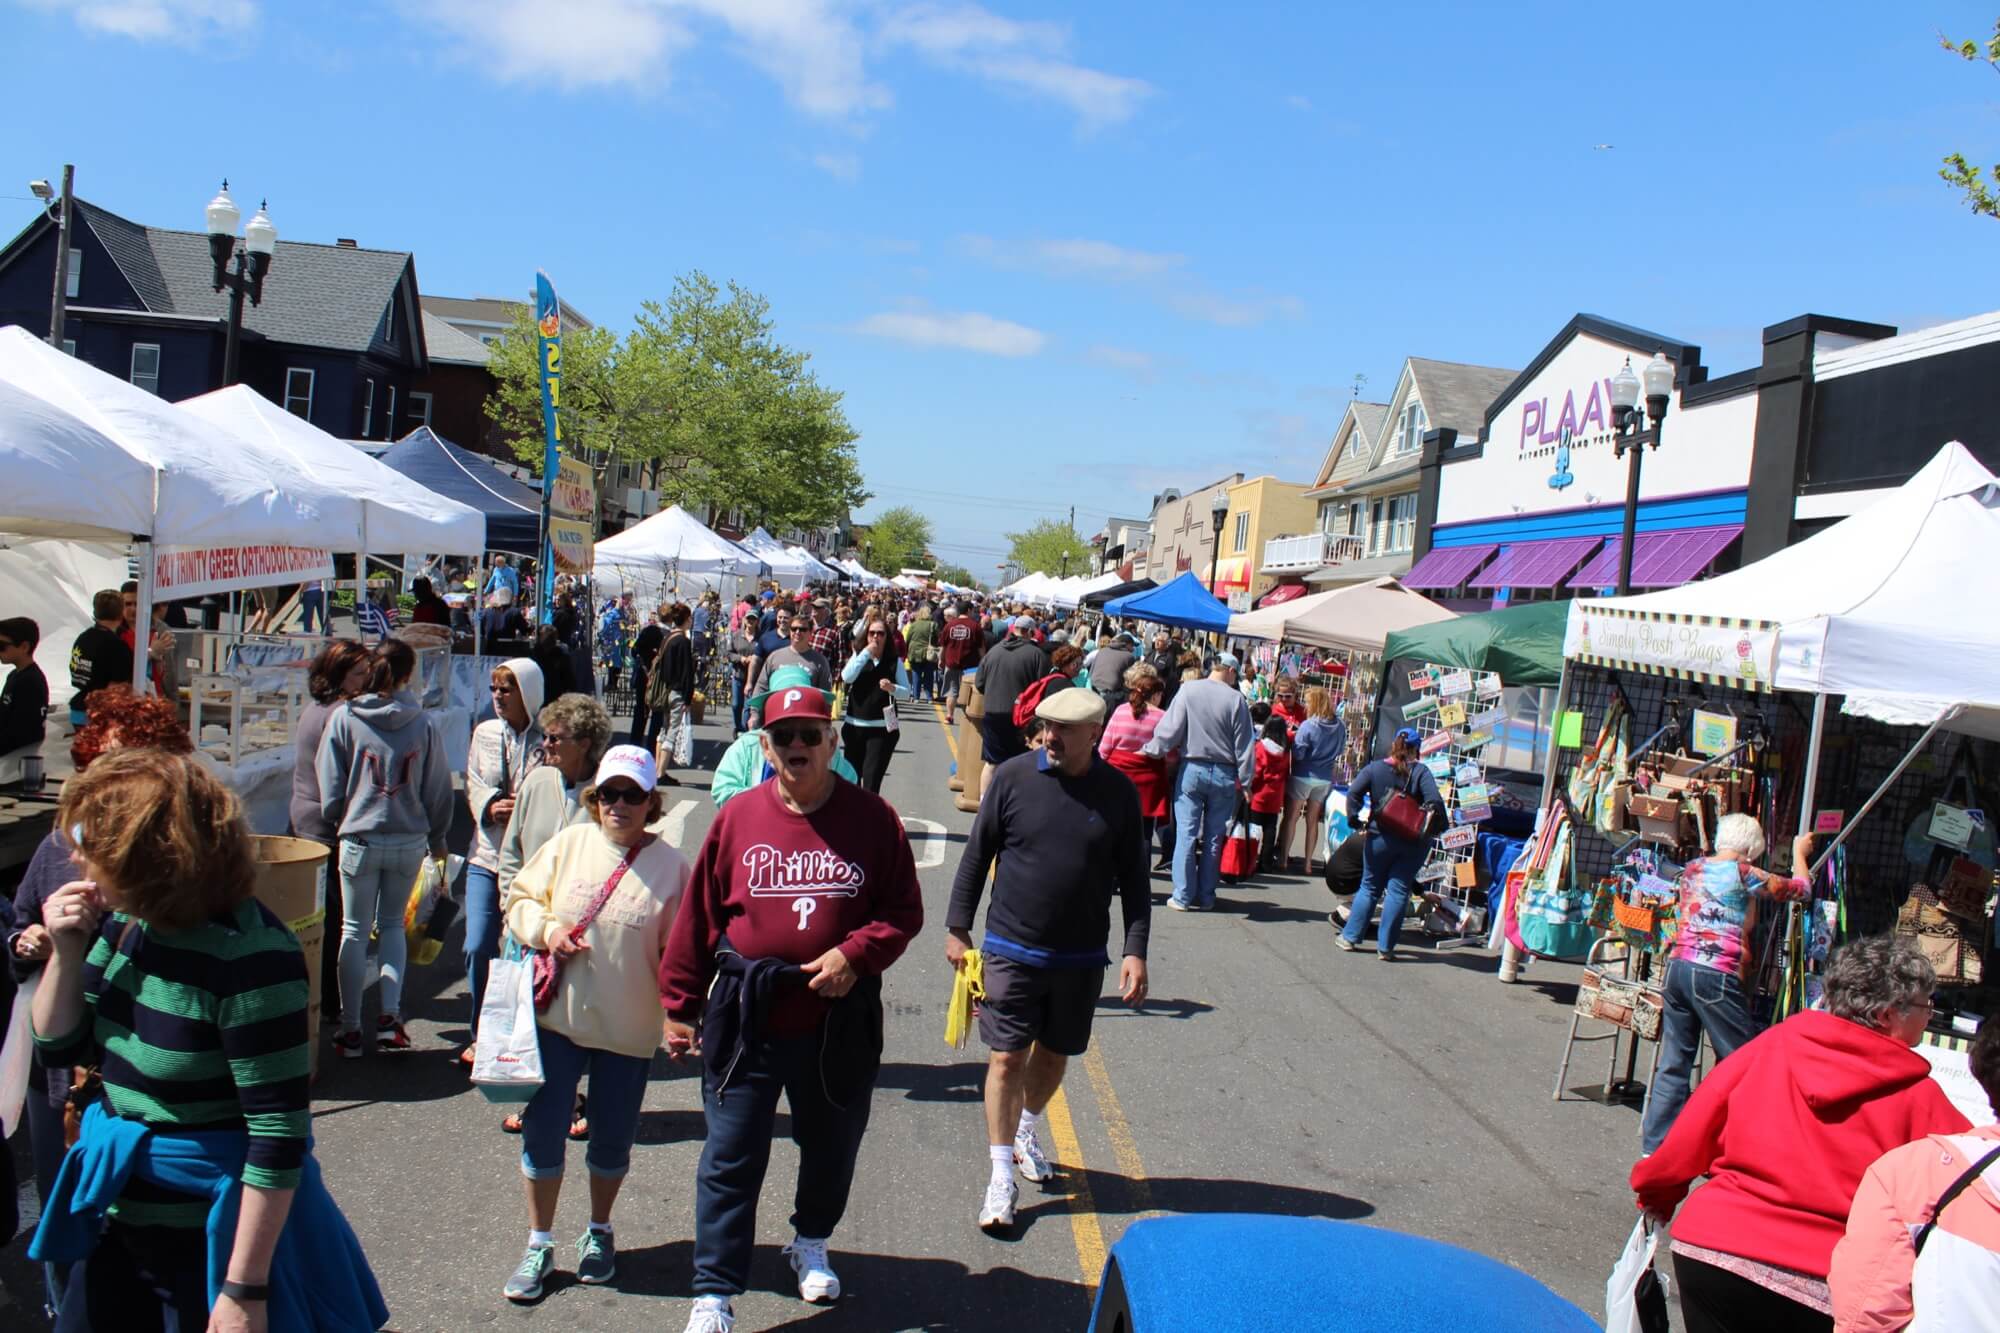 The Ocean City Block Party typically draws large crowds to Asbury Avenue